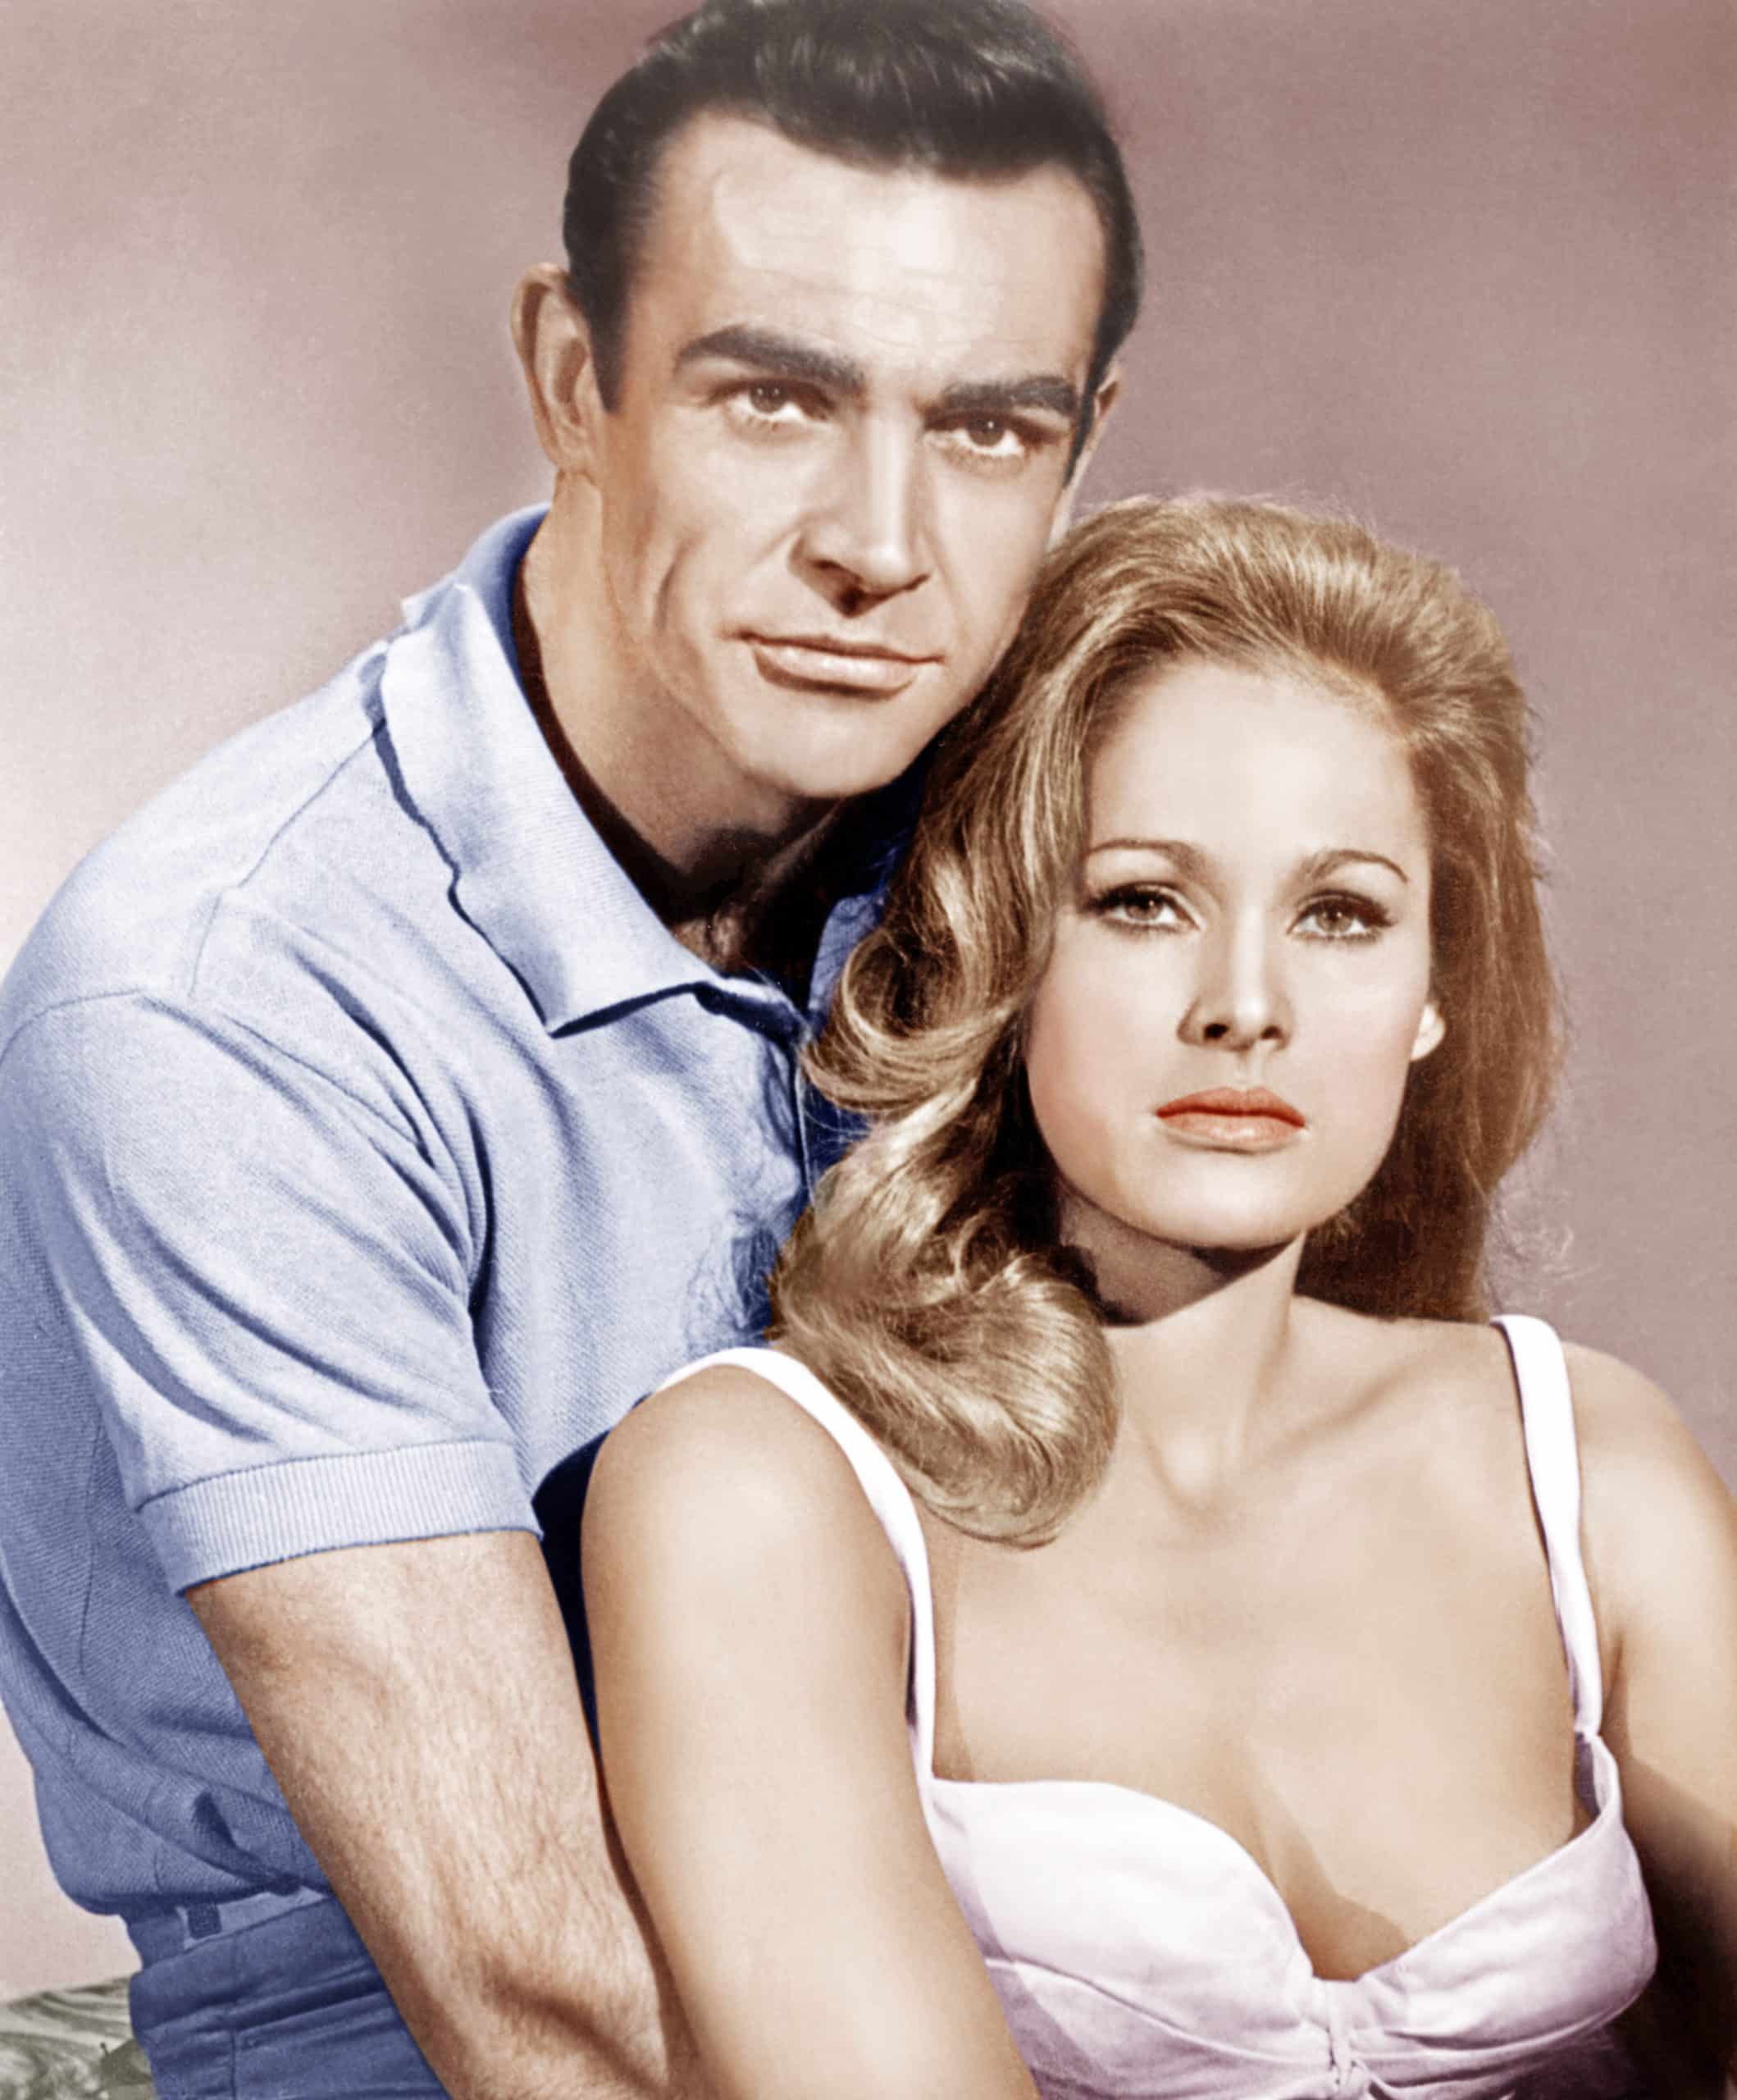 DR. NO, from left: Sean Connery, Ursula Andress, 1962